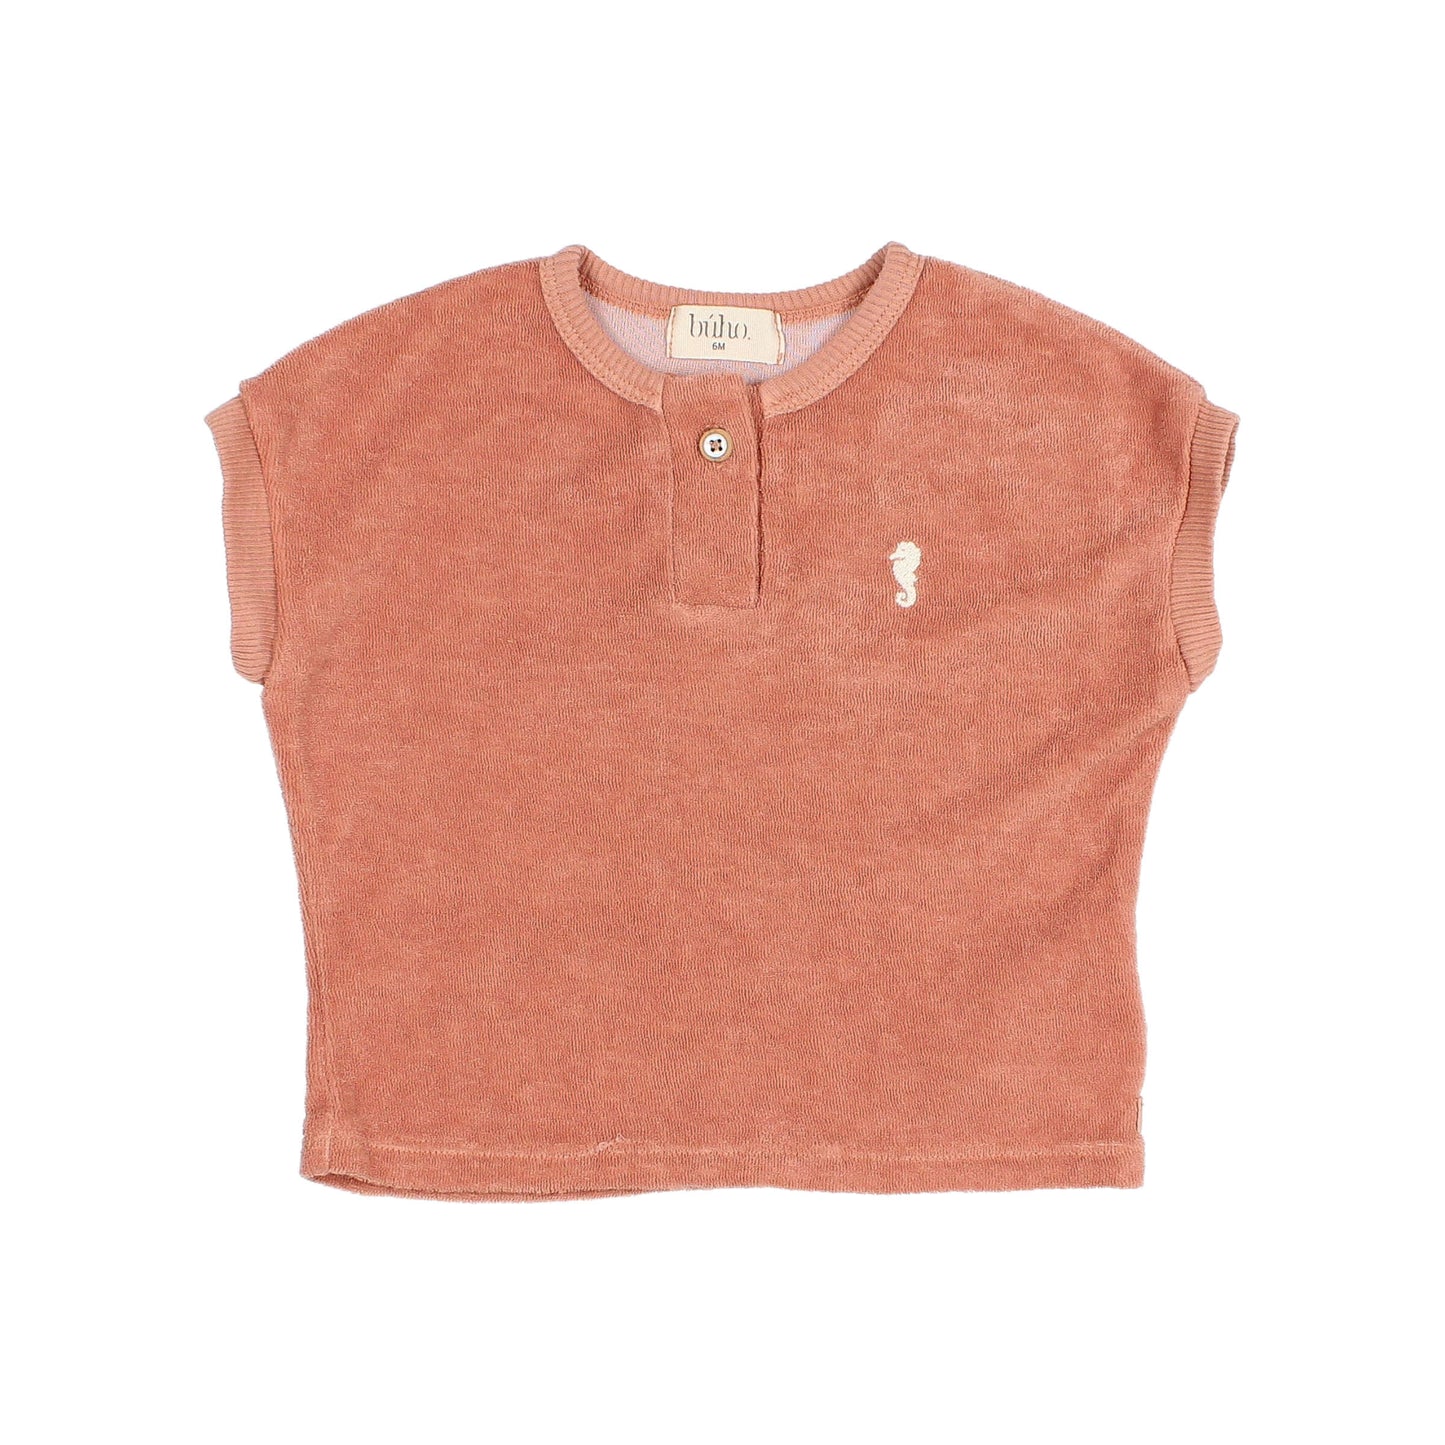 Buho| Terry t-shirt | Rose clay